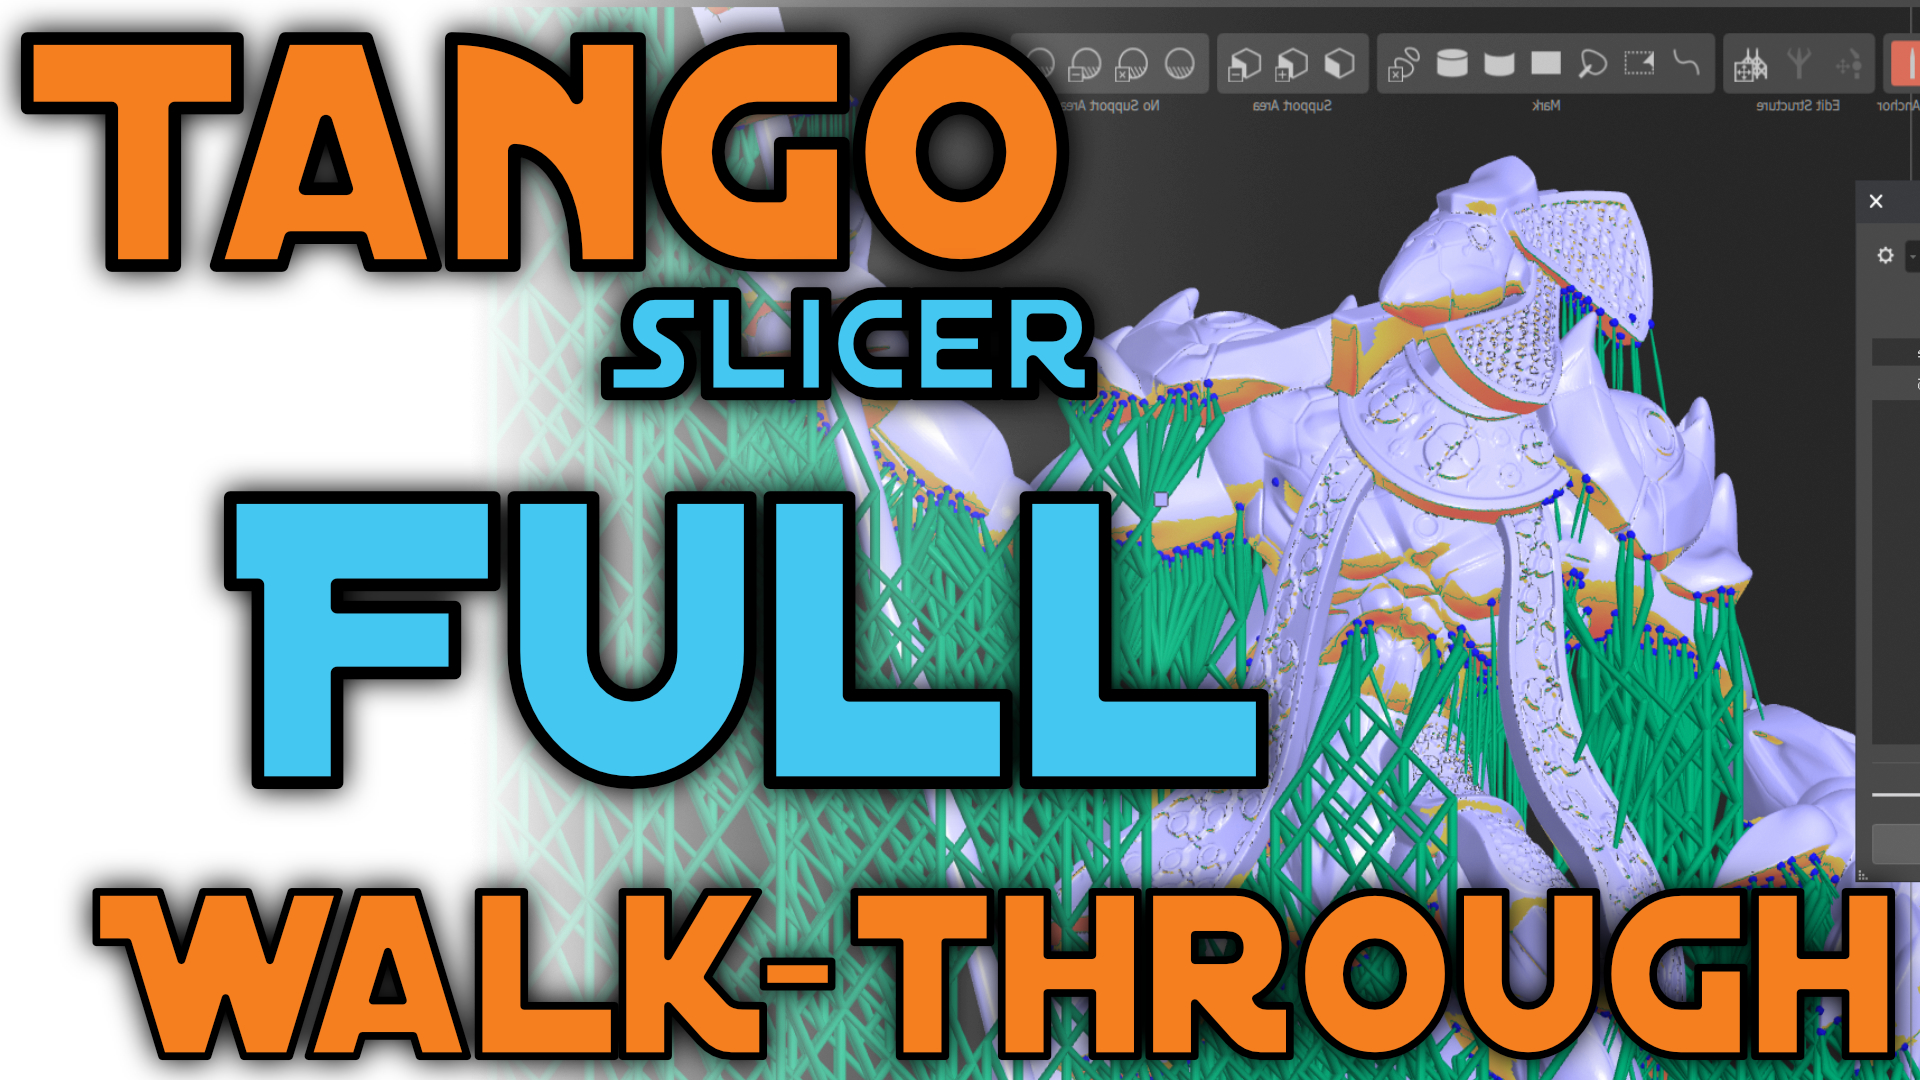 Tango Slicer: How To Use It – Full Instructional Guide